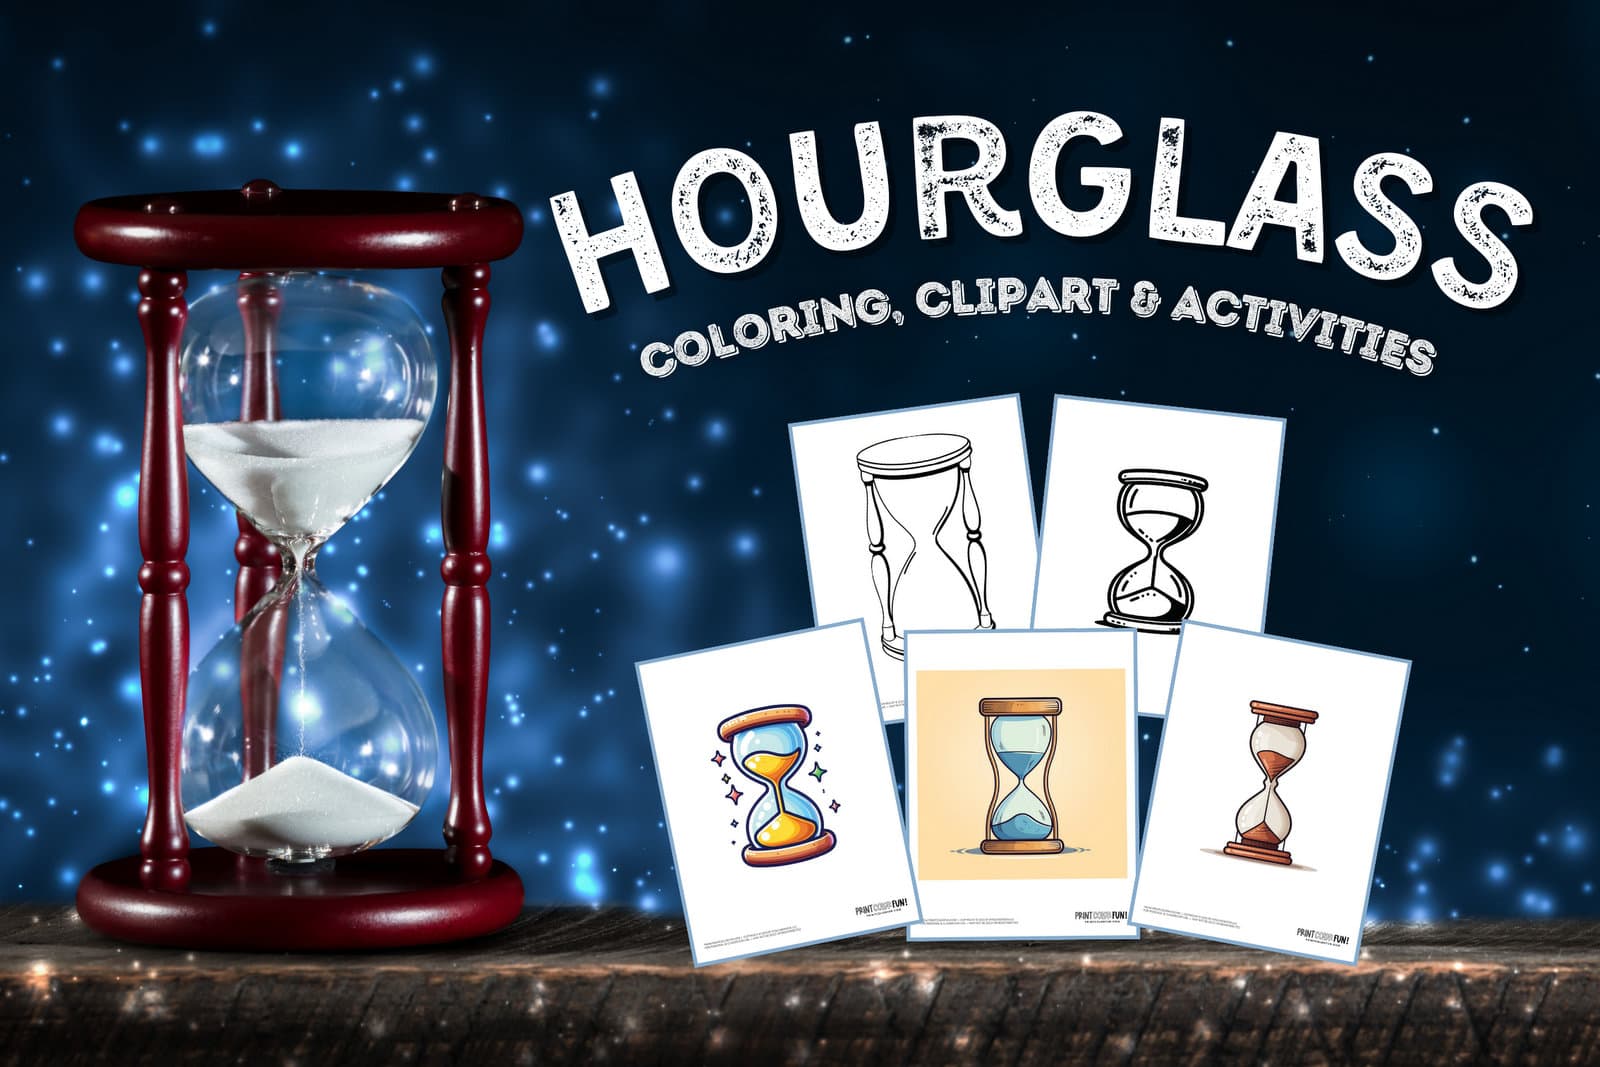 Hourglass coloring, clipart and more from PrintColorFun com